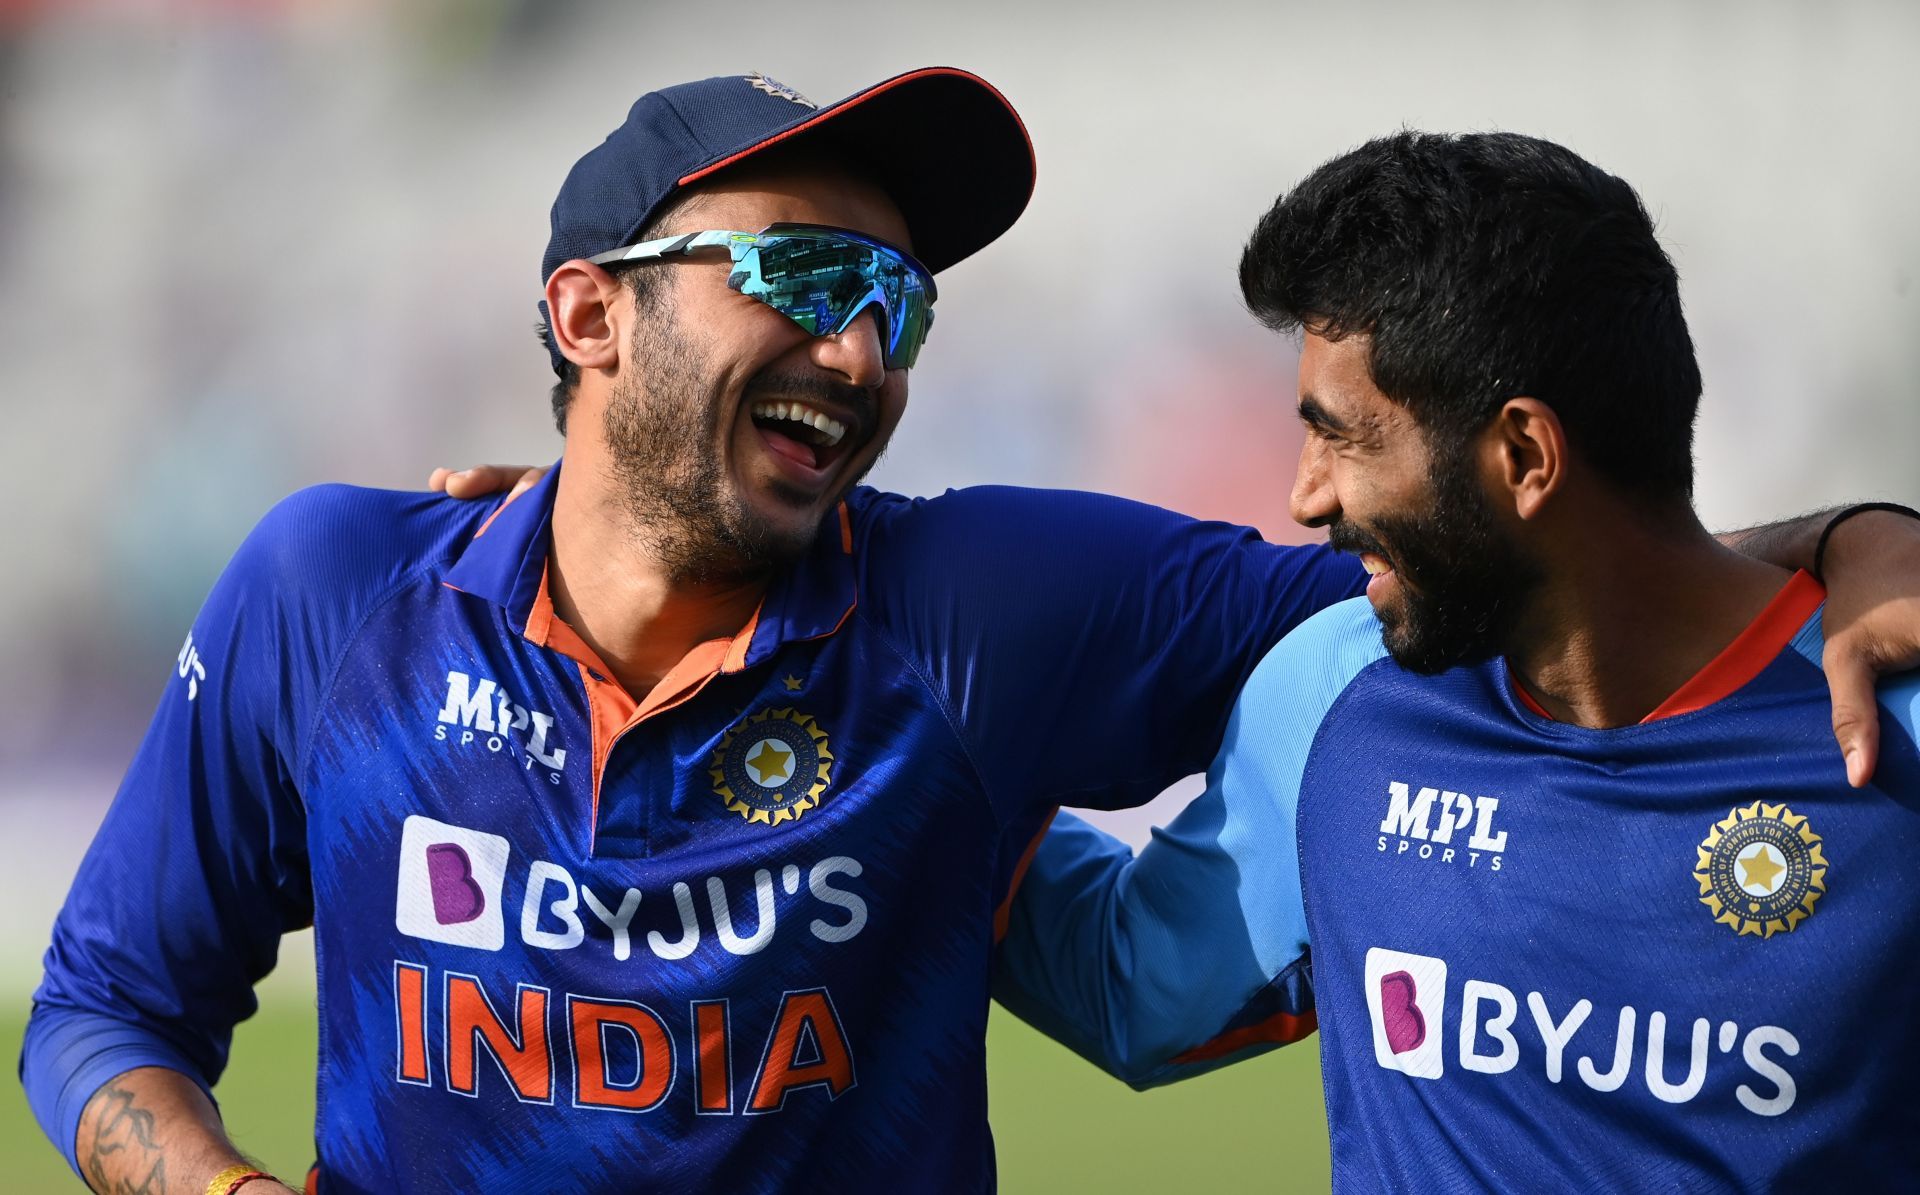 Jasprit Bumrah returns to lead the India attack